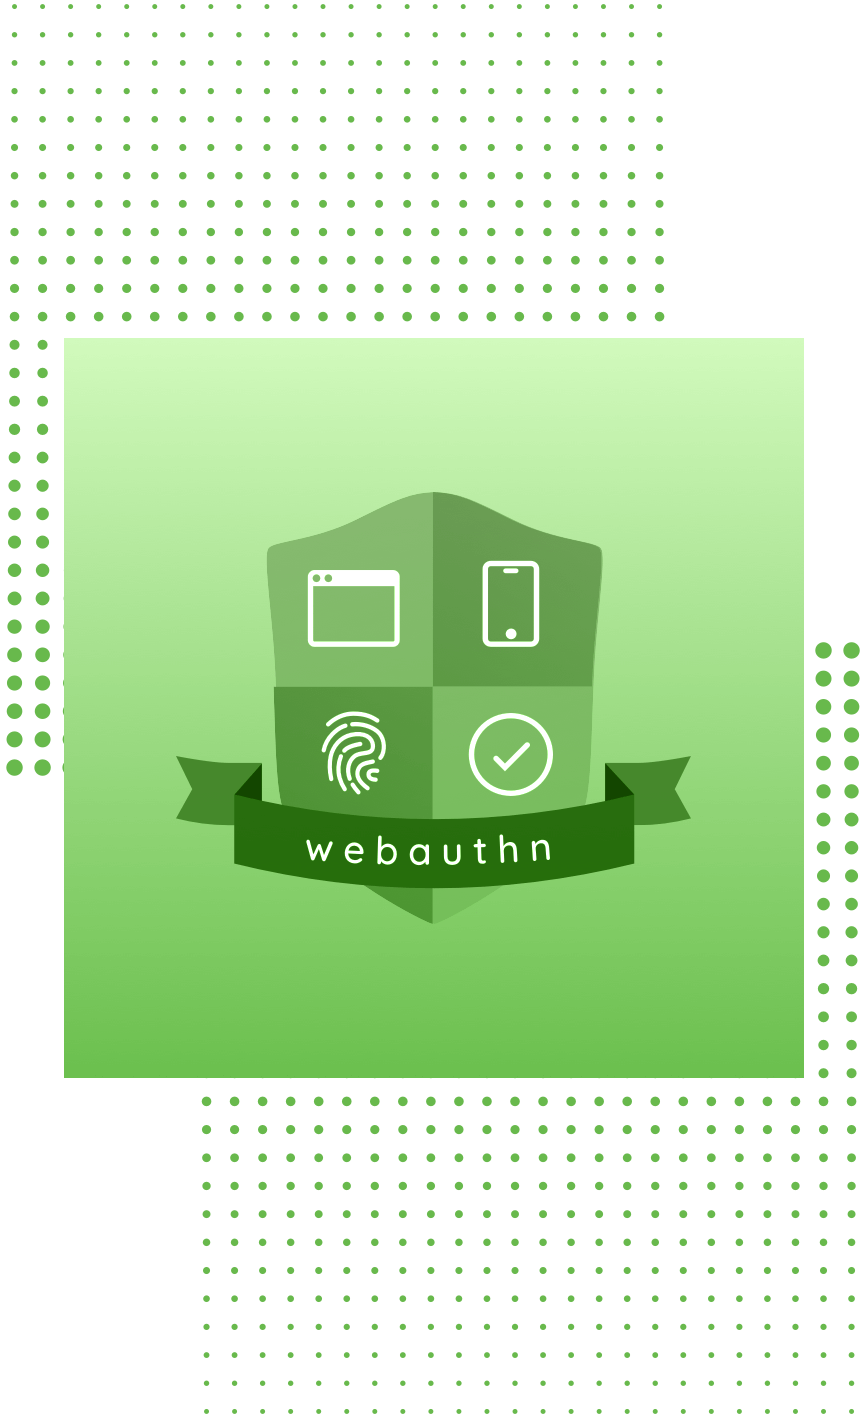 An image of webauthn